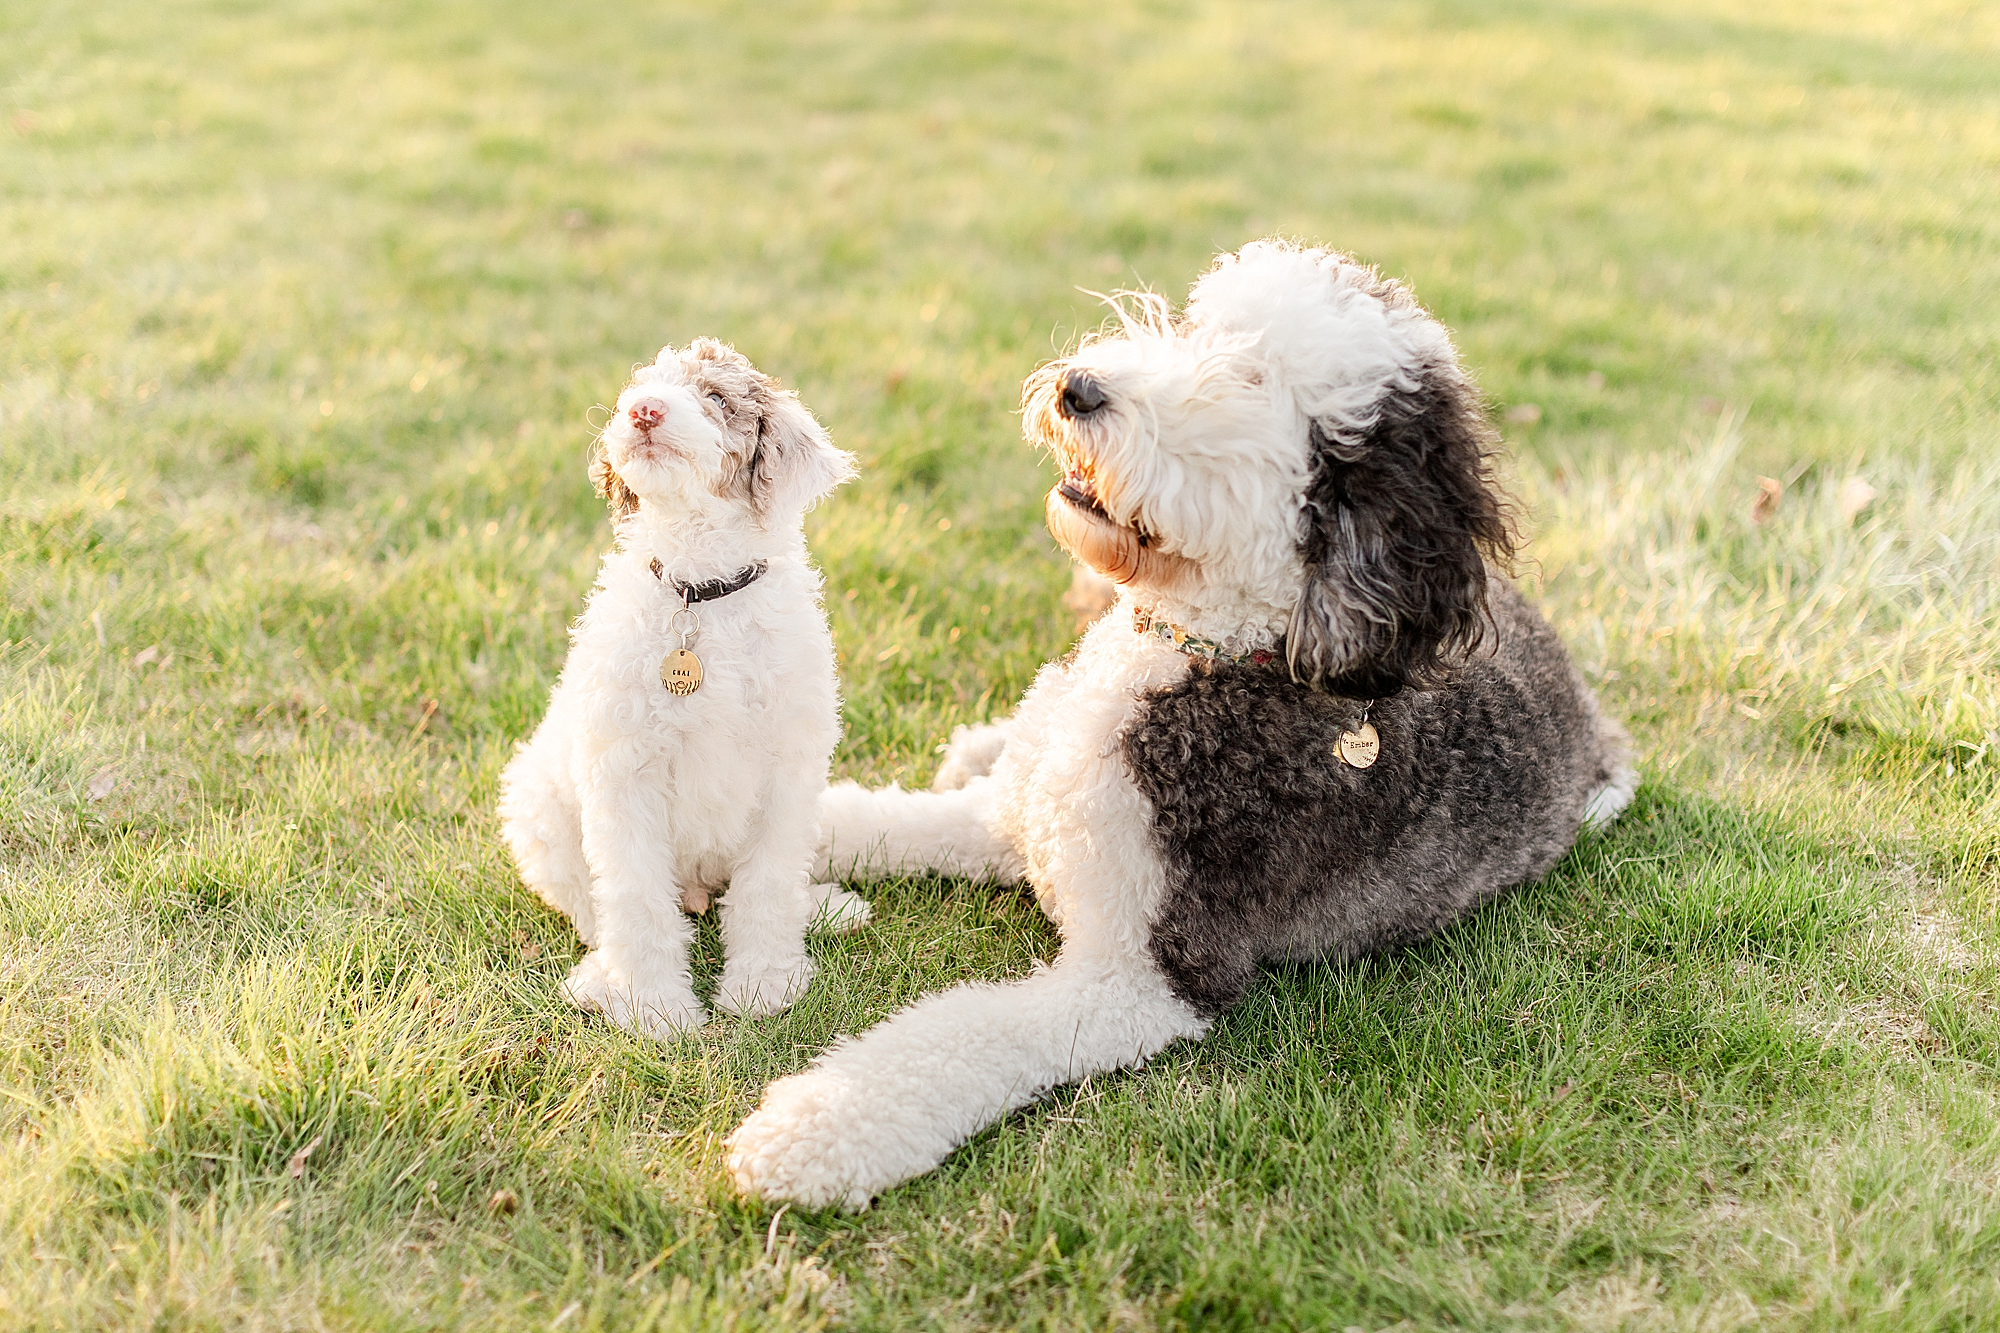 two Sheepadoodle dogs sit together in grass